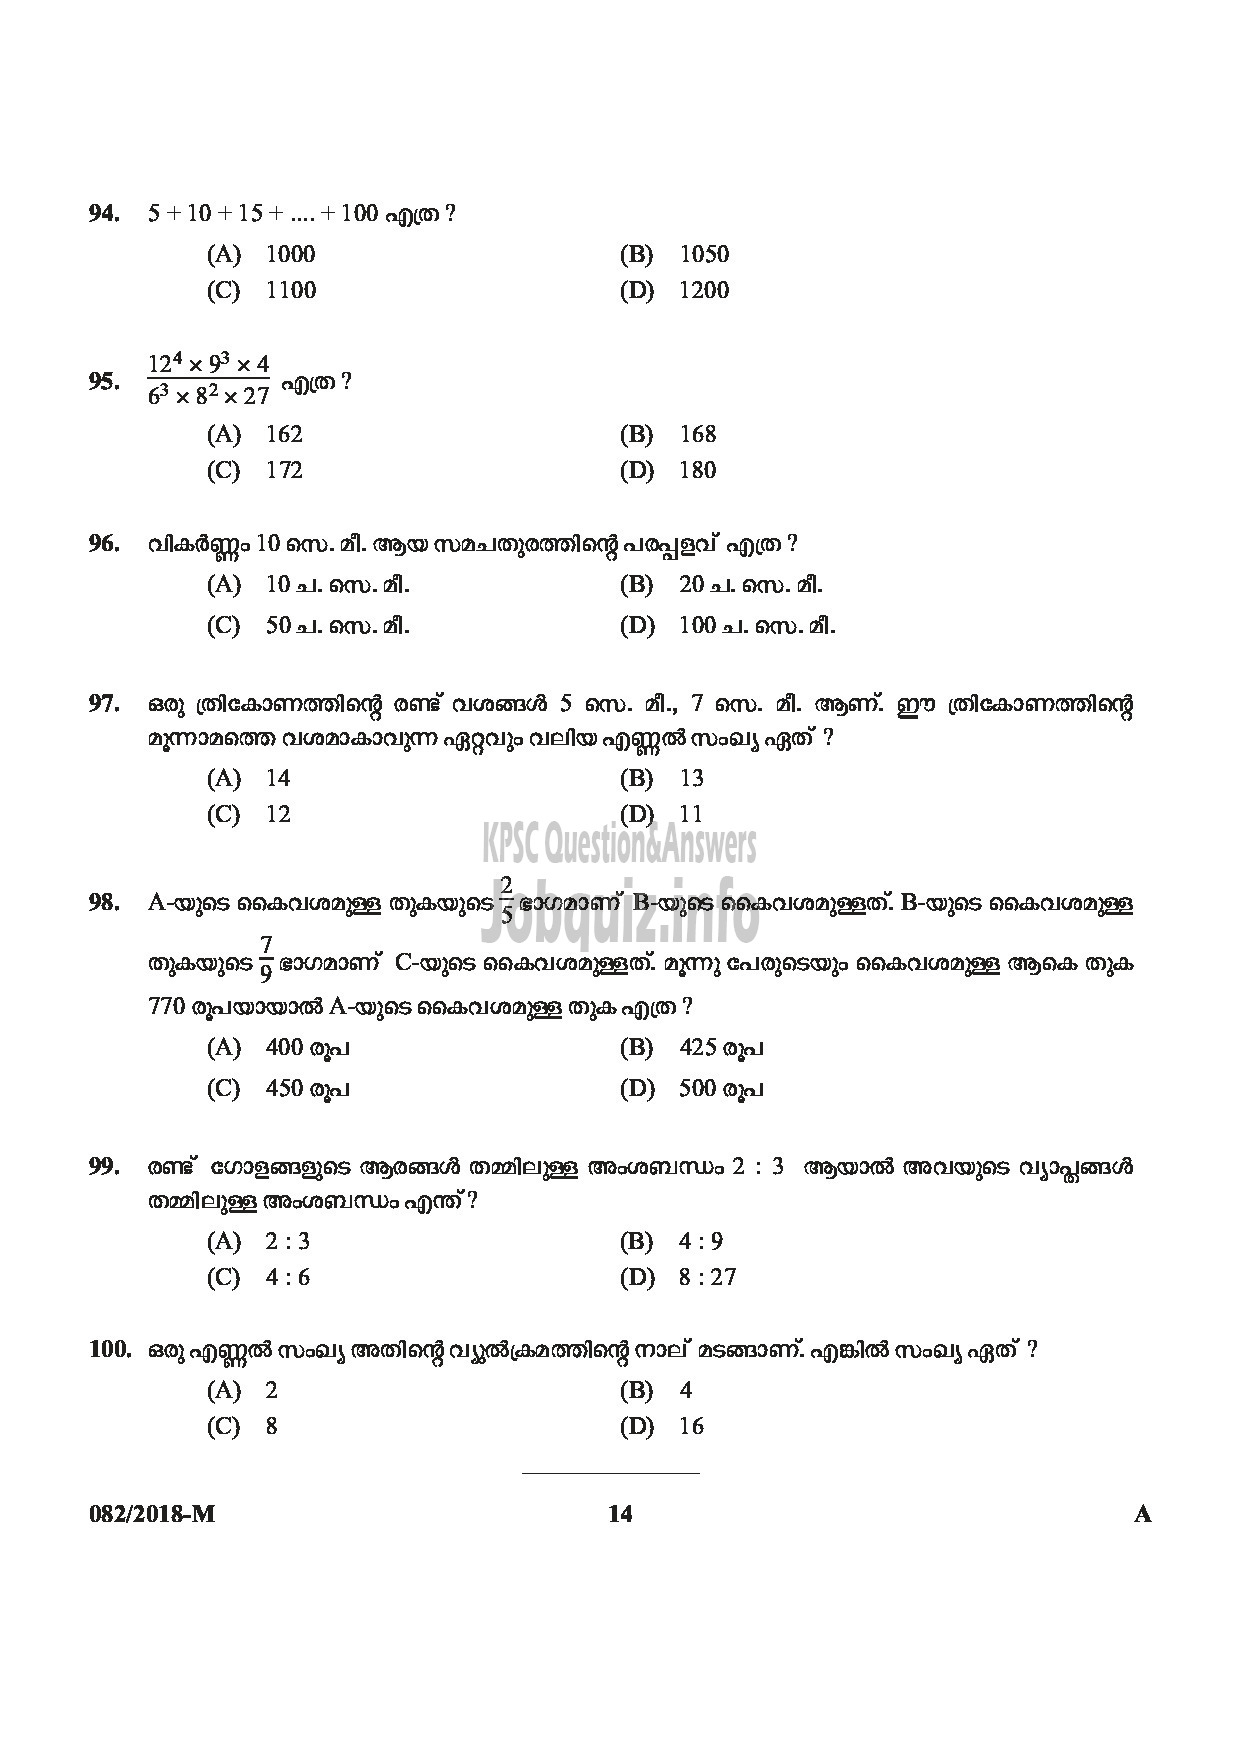 Kerala PSC Question Paper - LAB ASSISTANT HIGHER SECONDARY EDUCATION-14